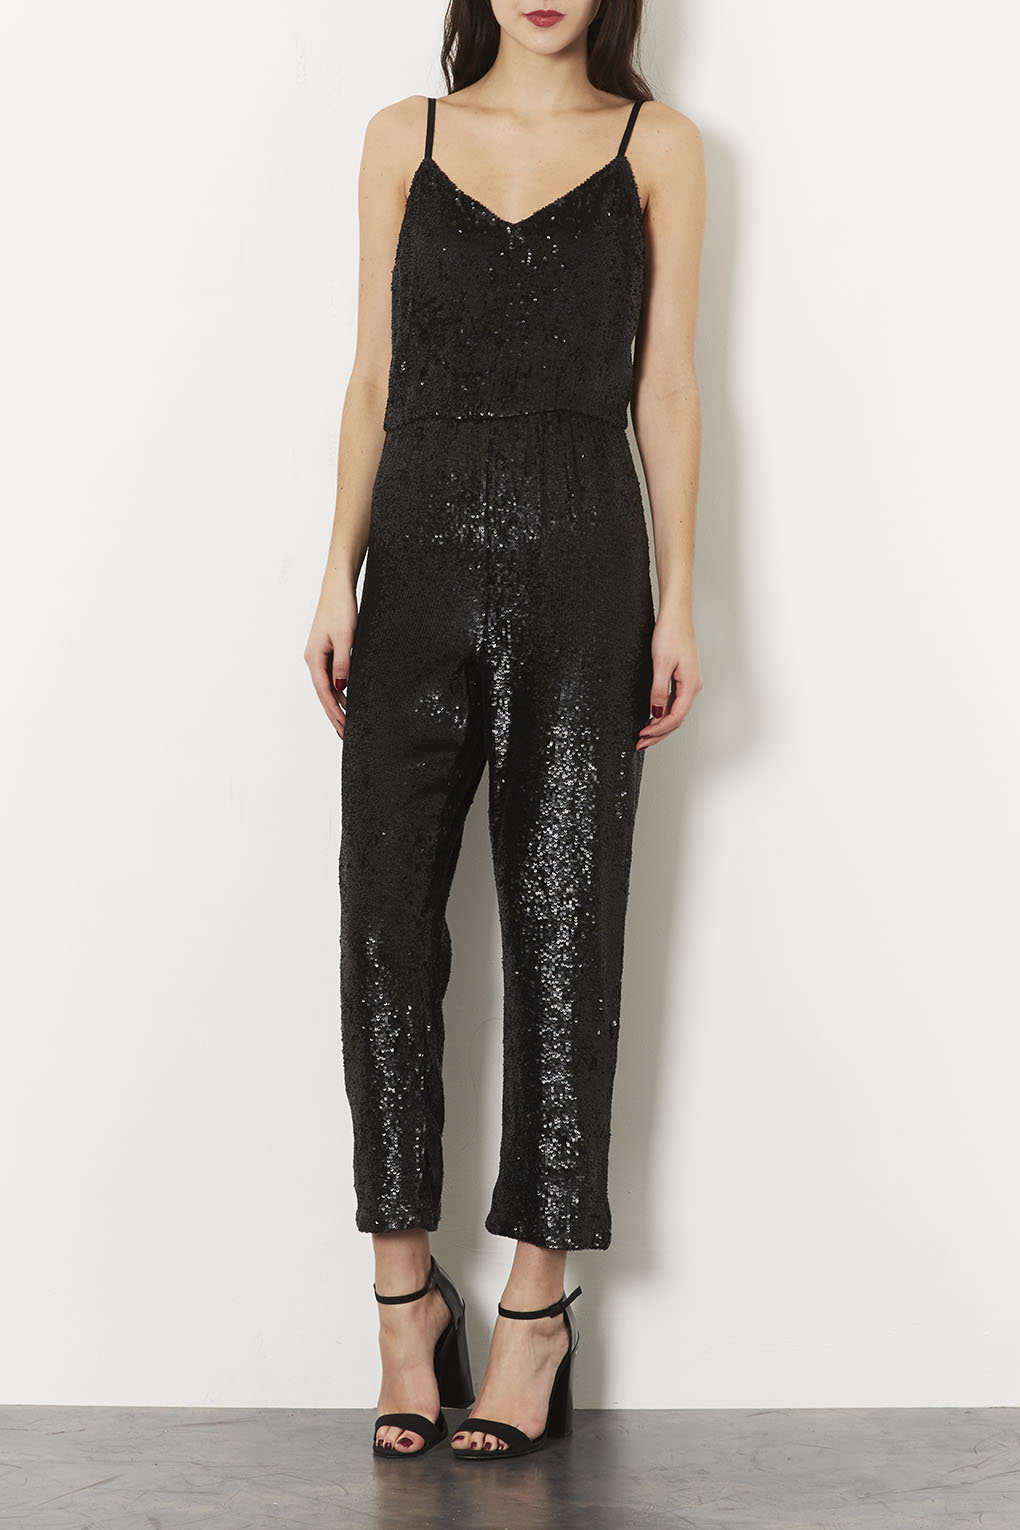 Lyst - TOPSHOP Sequin Strappy Jumpsuit in Black